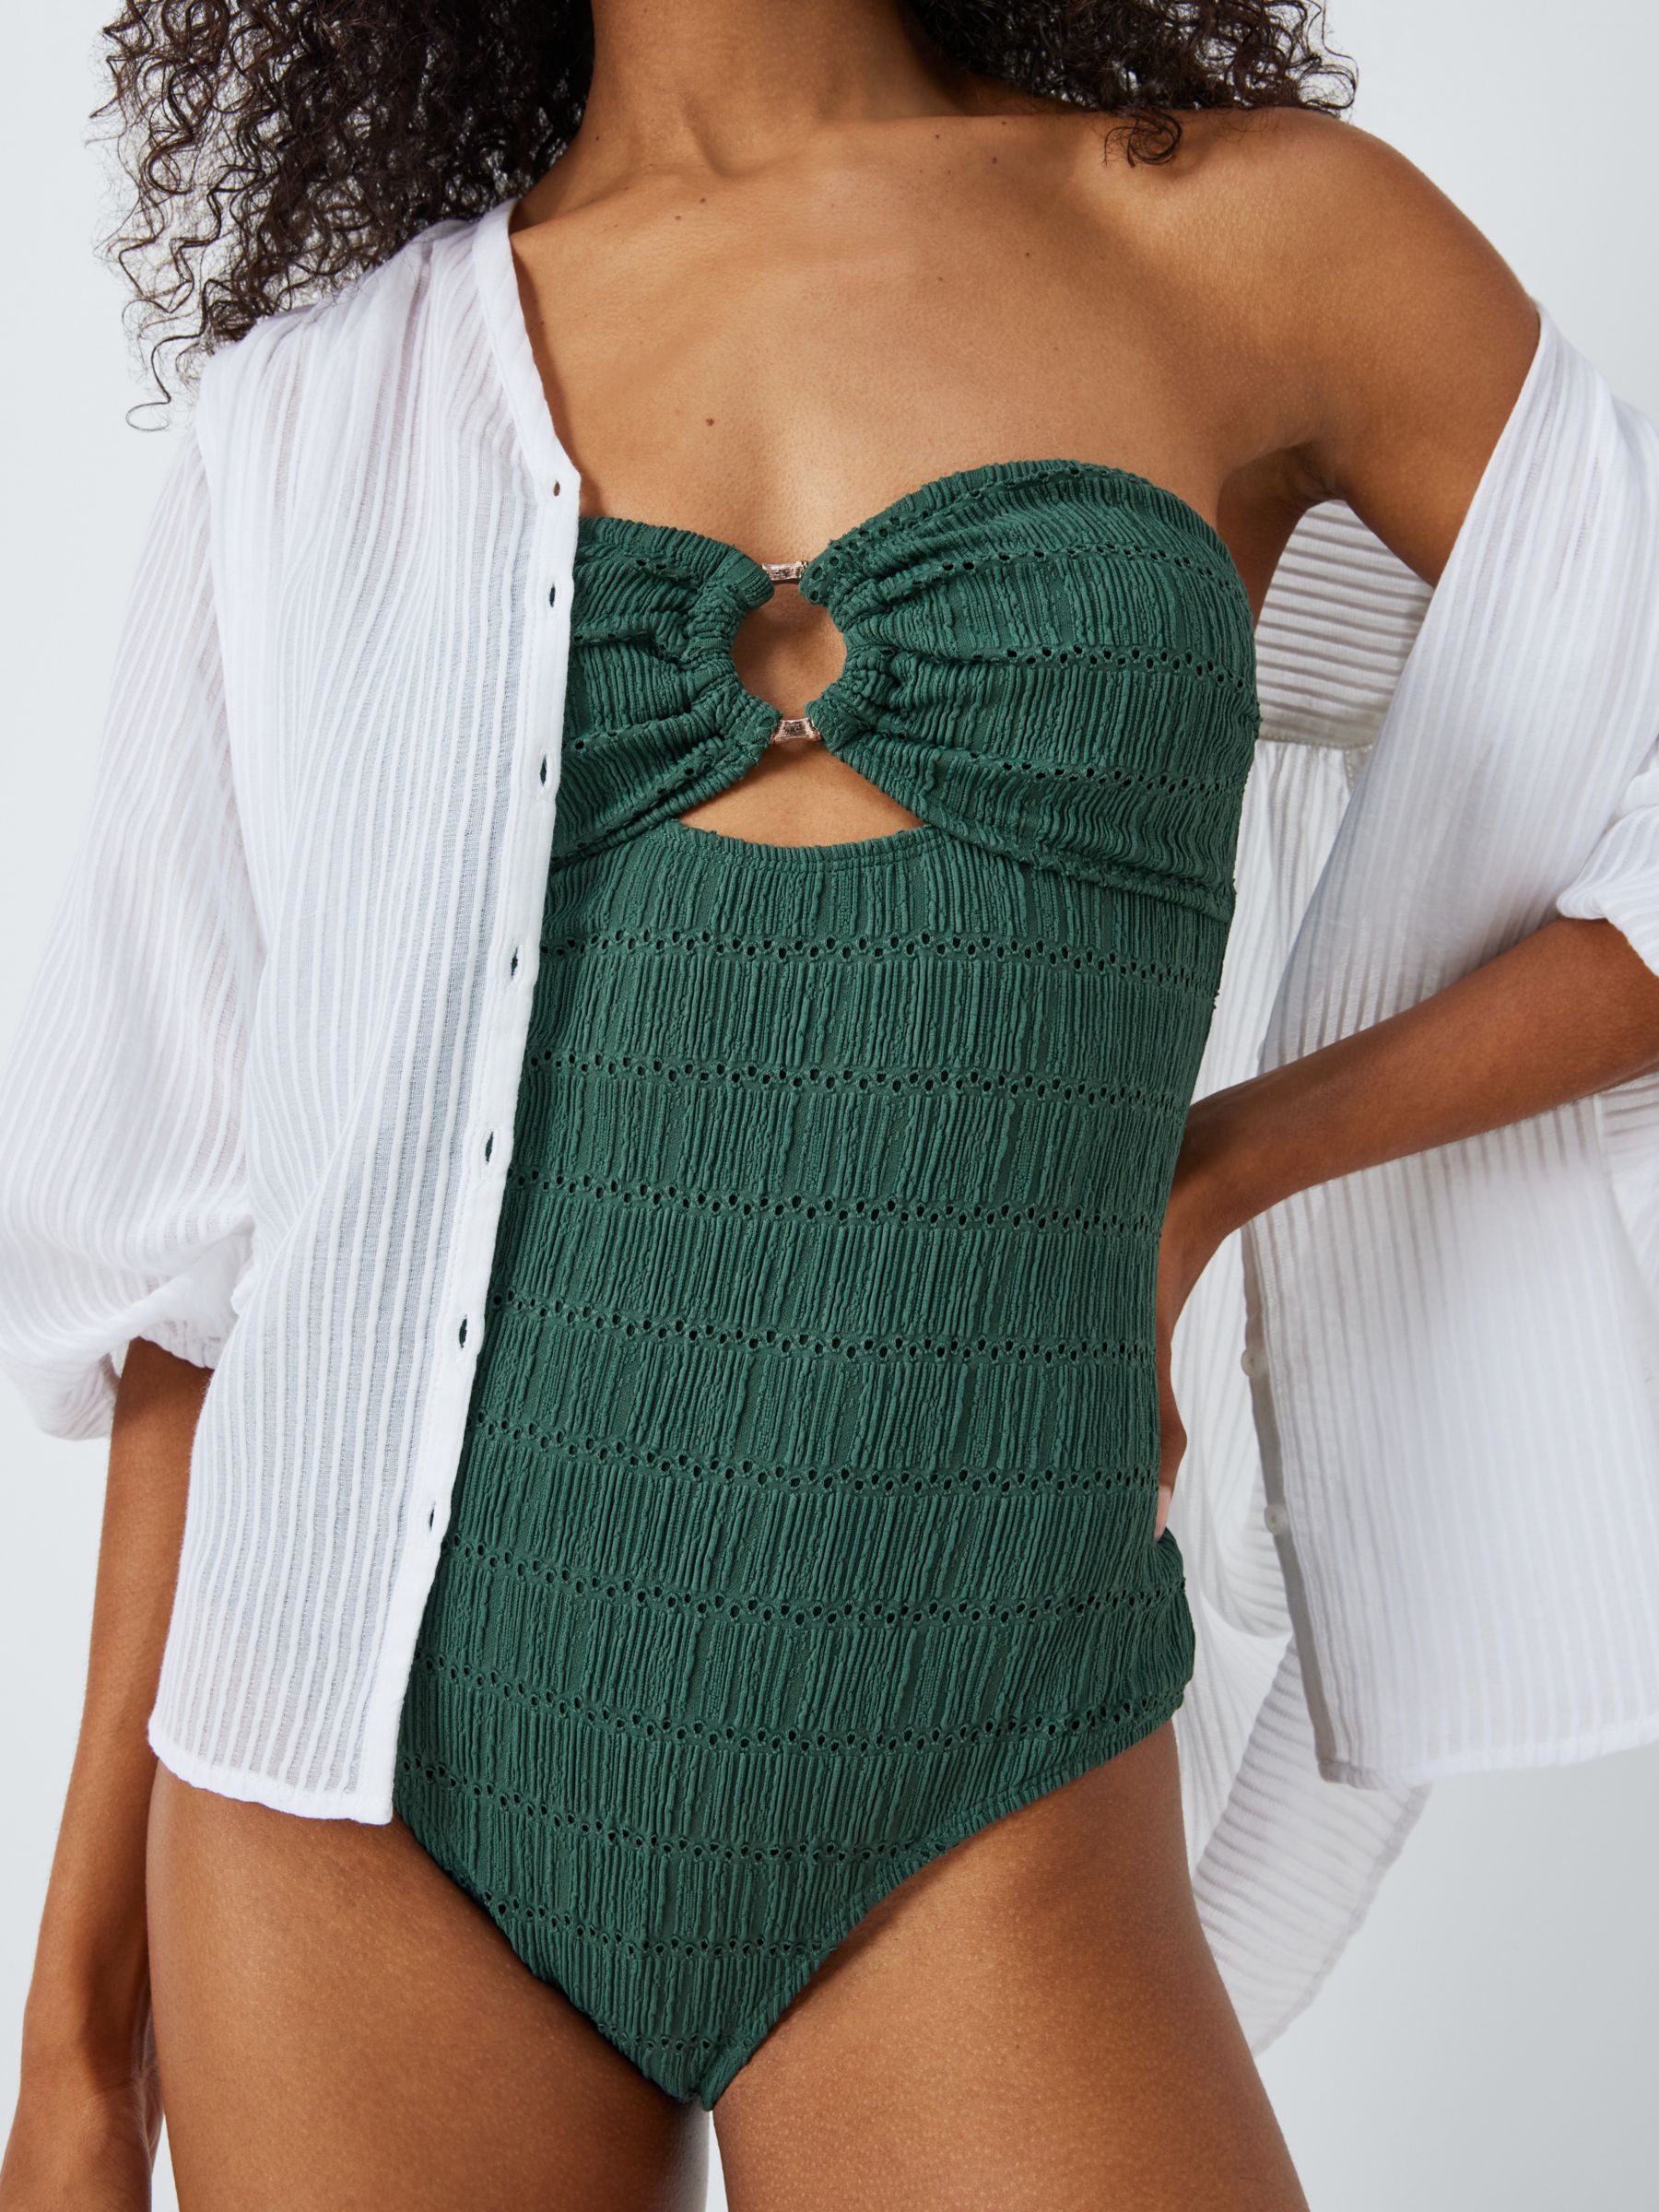 AND/OR Bali Crochet Swimsuit, Green, 18